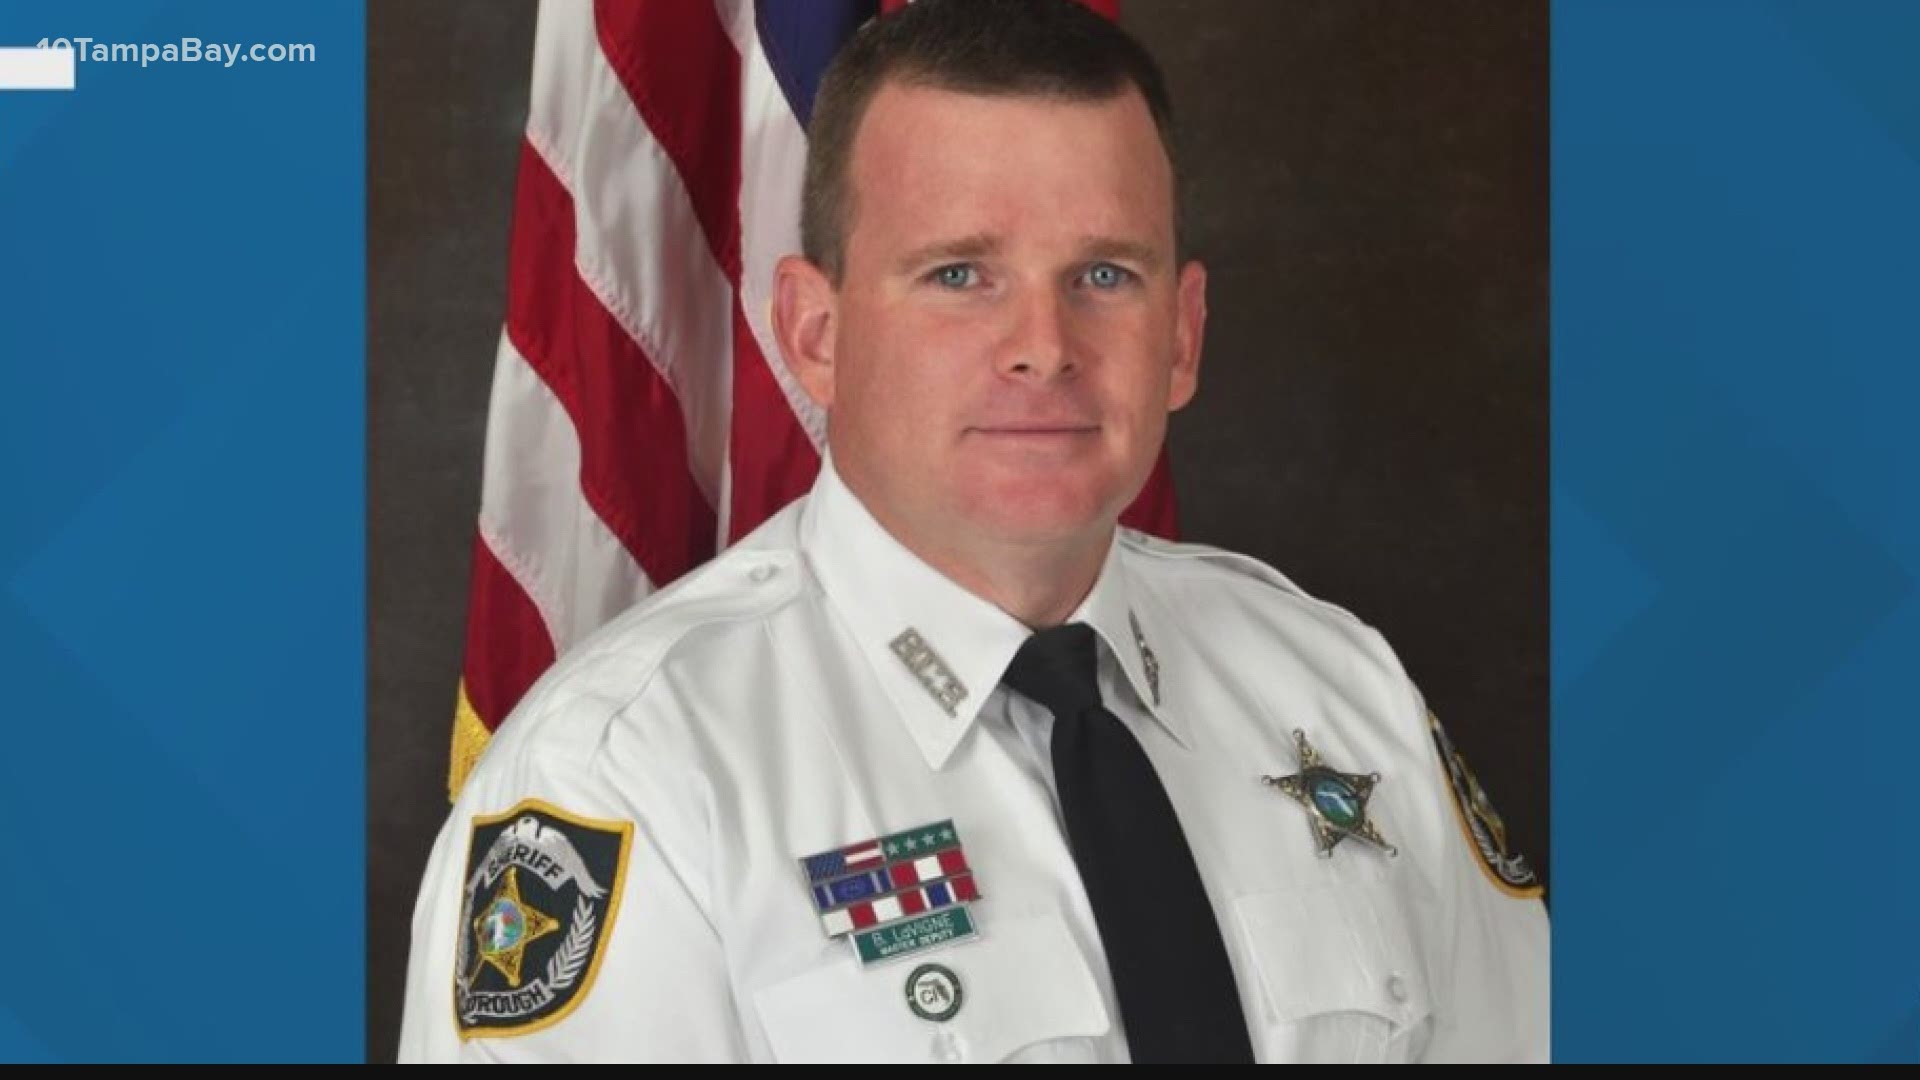 Corporal Brian LaVigne died Monday when a suspect, who was trying to get away from deputies, plowed into the driver's side of his cruiser on Lumsden Road.